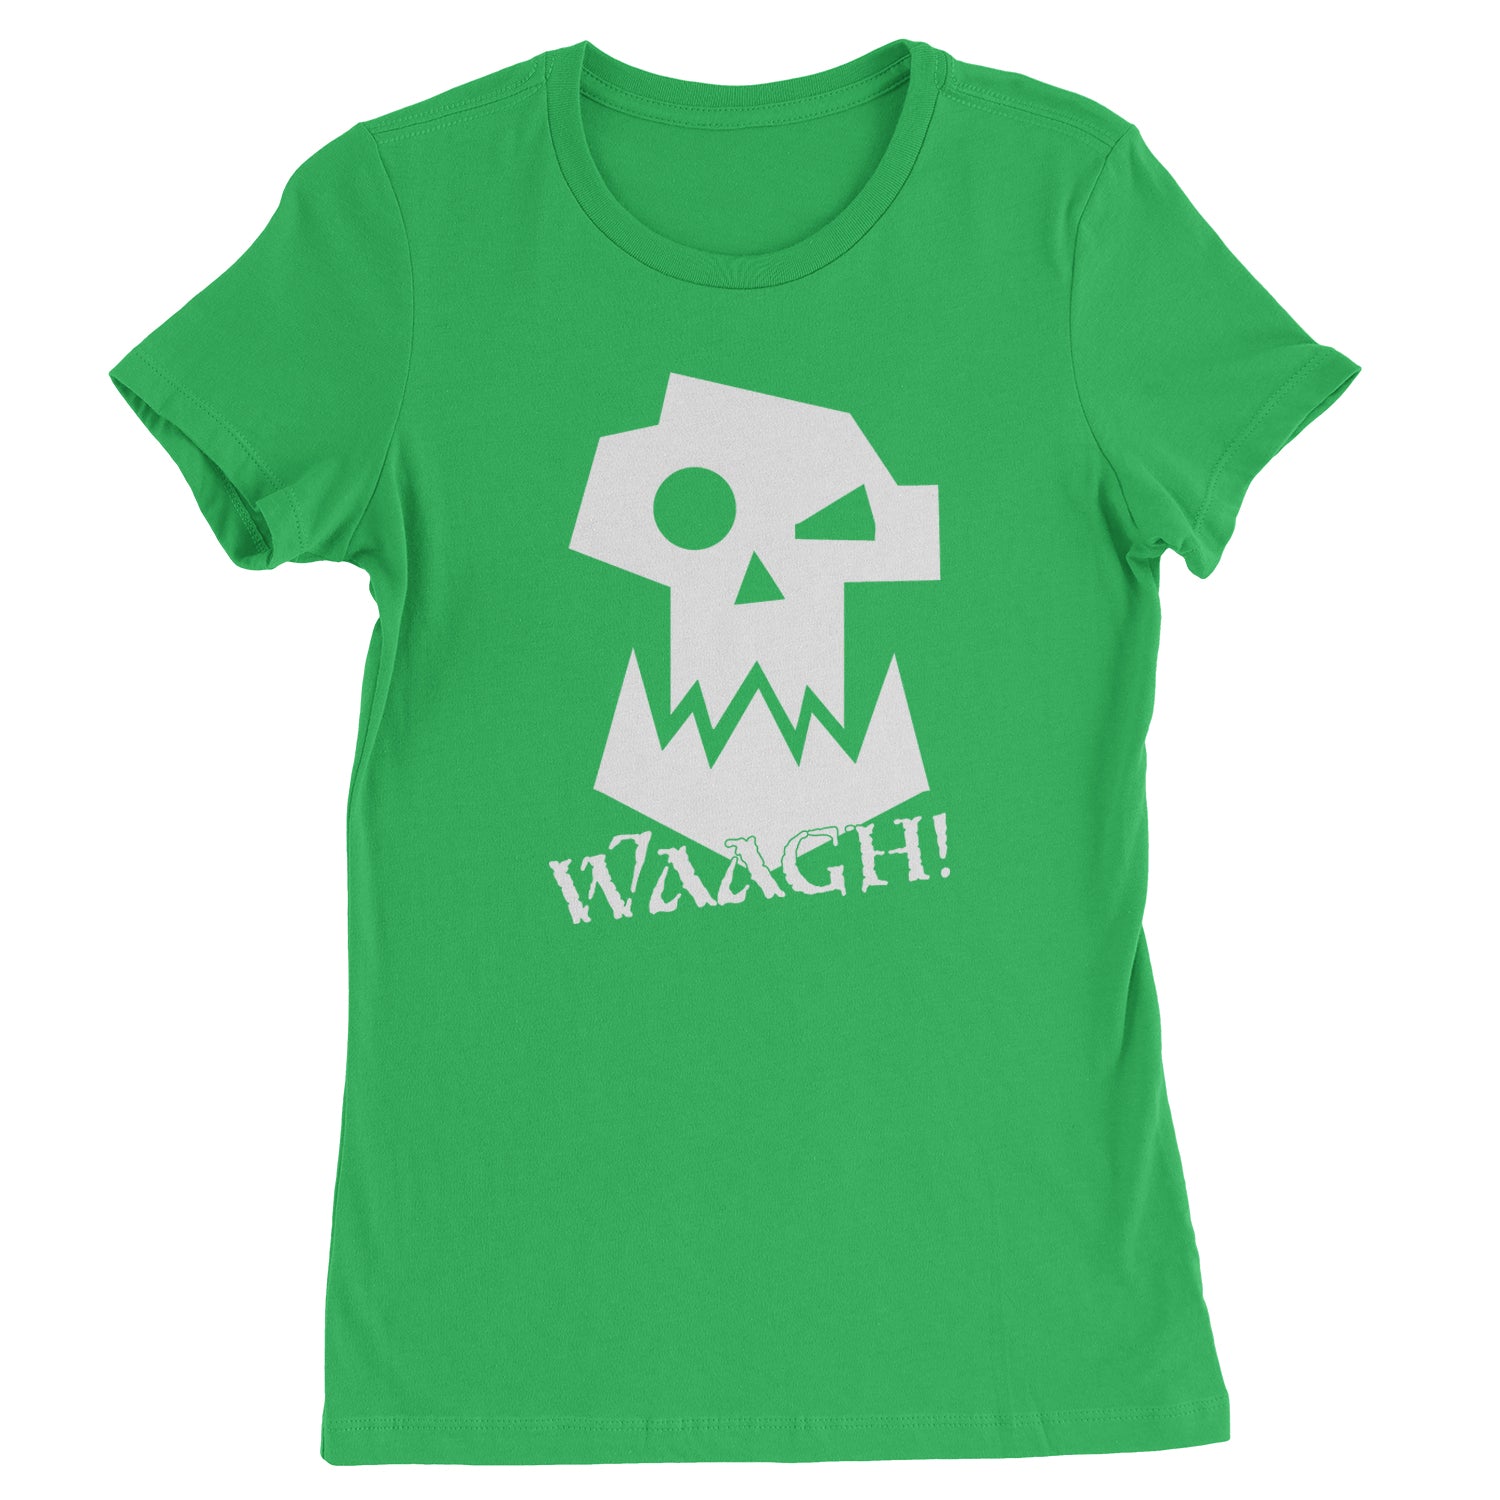 Ork Miniature Tabletop Wargaming Waagh Womens T-shirt #expressiontees by Expression Tees